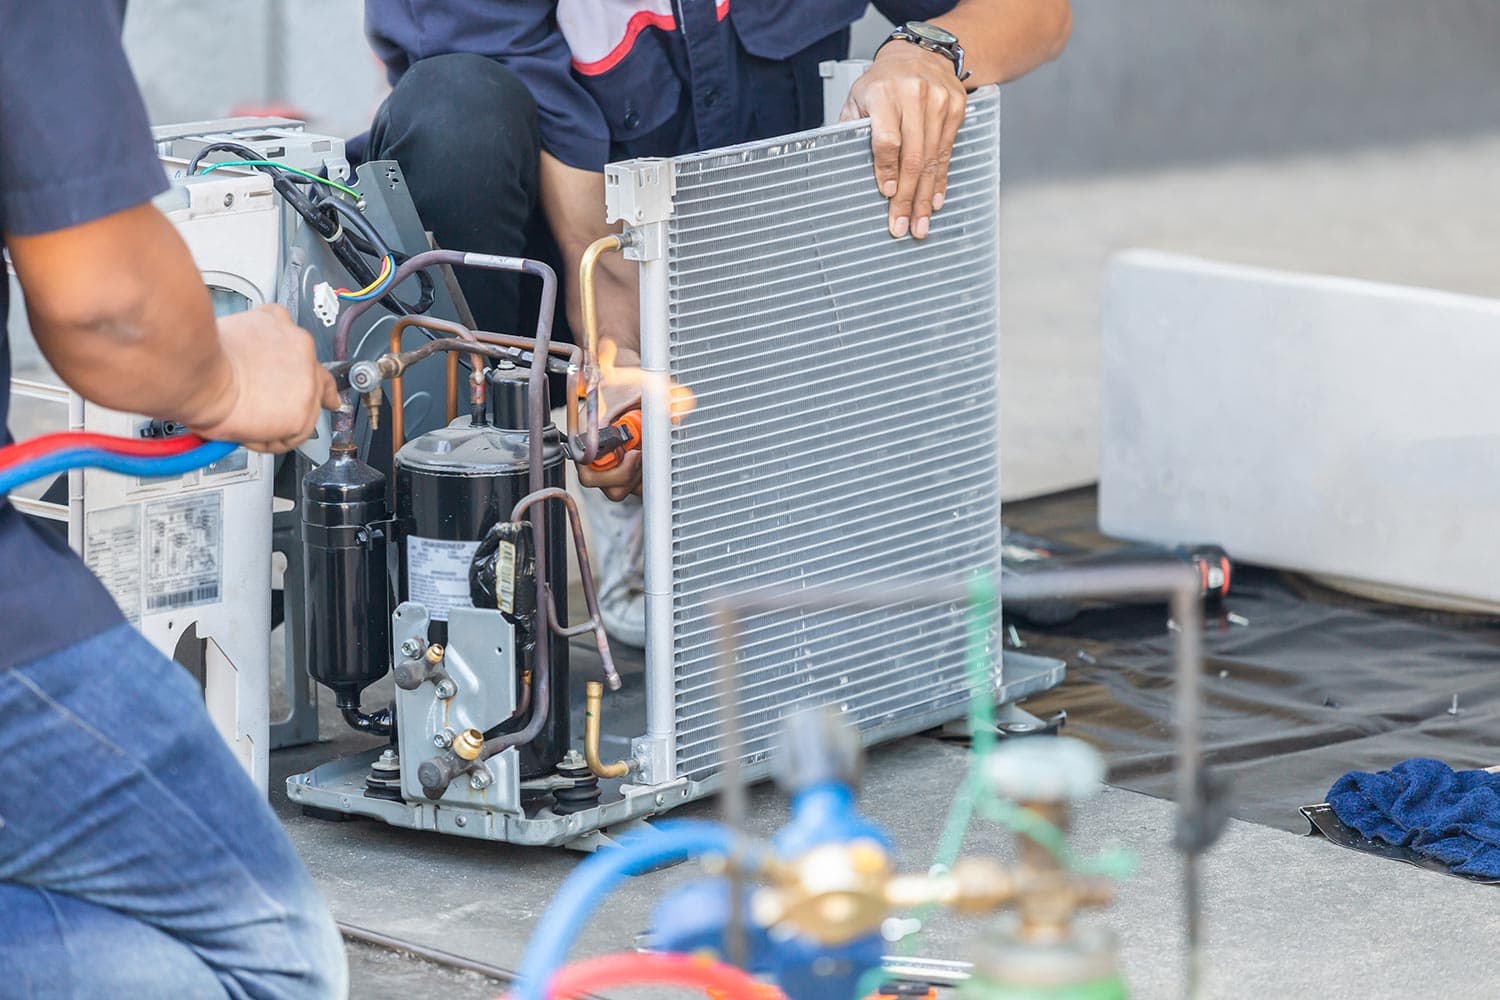 Air Conditioning repair team use fuel gases and oxygen to weld or cut metals